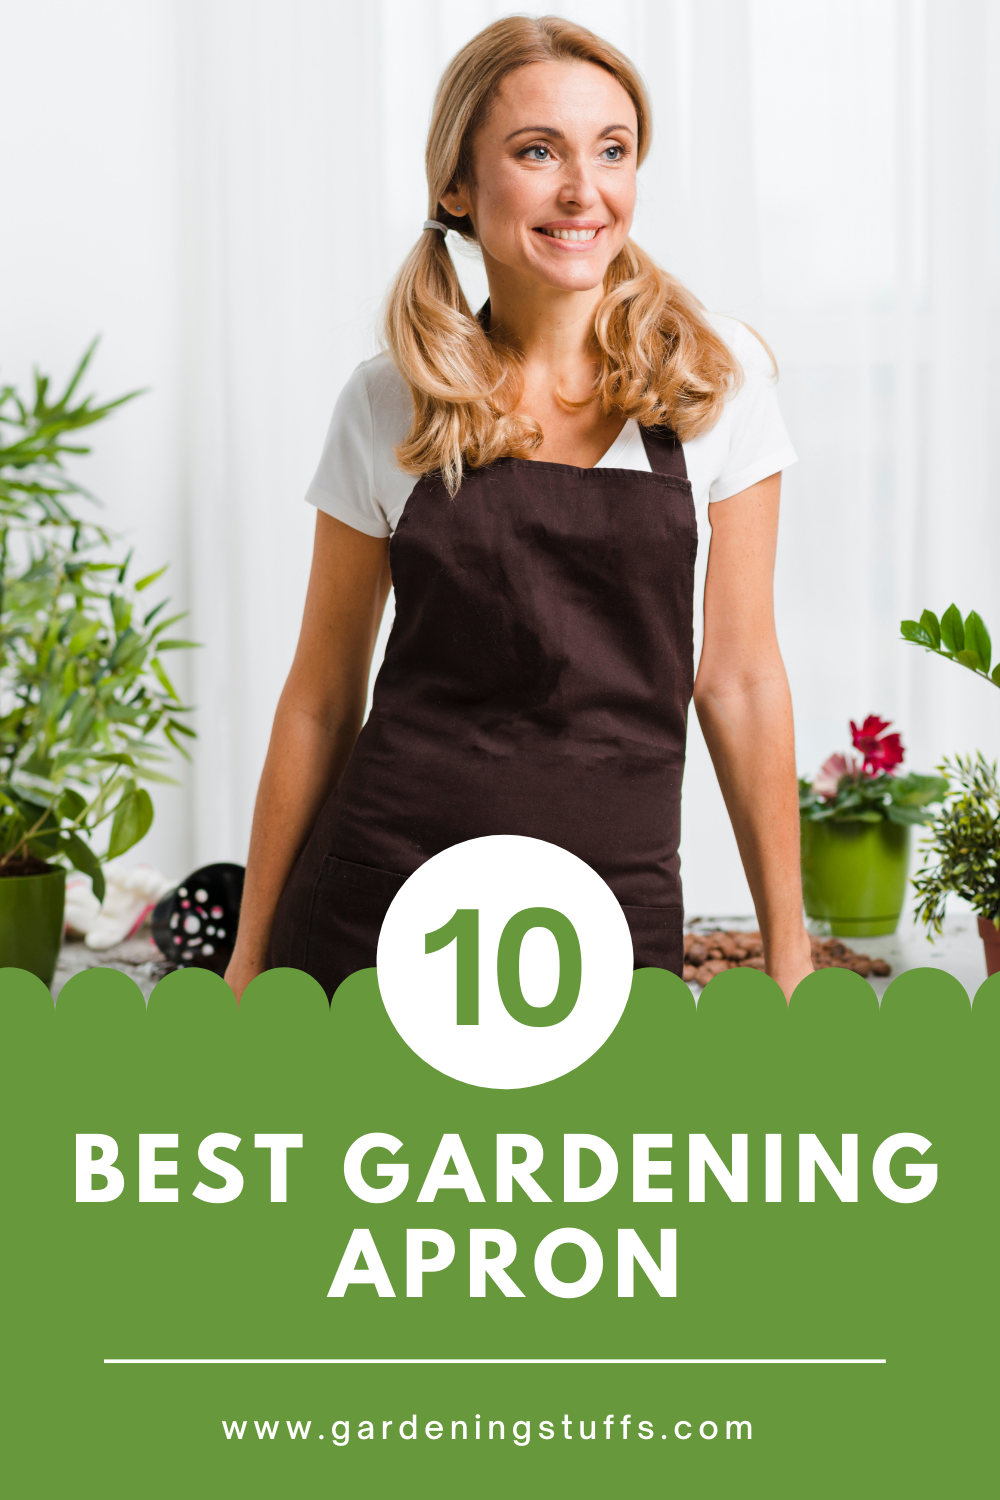 Keeping yourselves clean while working in the garden is important, therefore it is very important that you purchase the best gardening apron from the market. Check out our buying guide, we’ve listed the best apron available on the market and we provide a few factors that could help you purchase a gardening apron with ease.